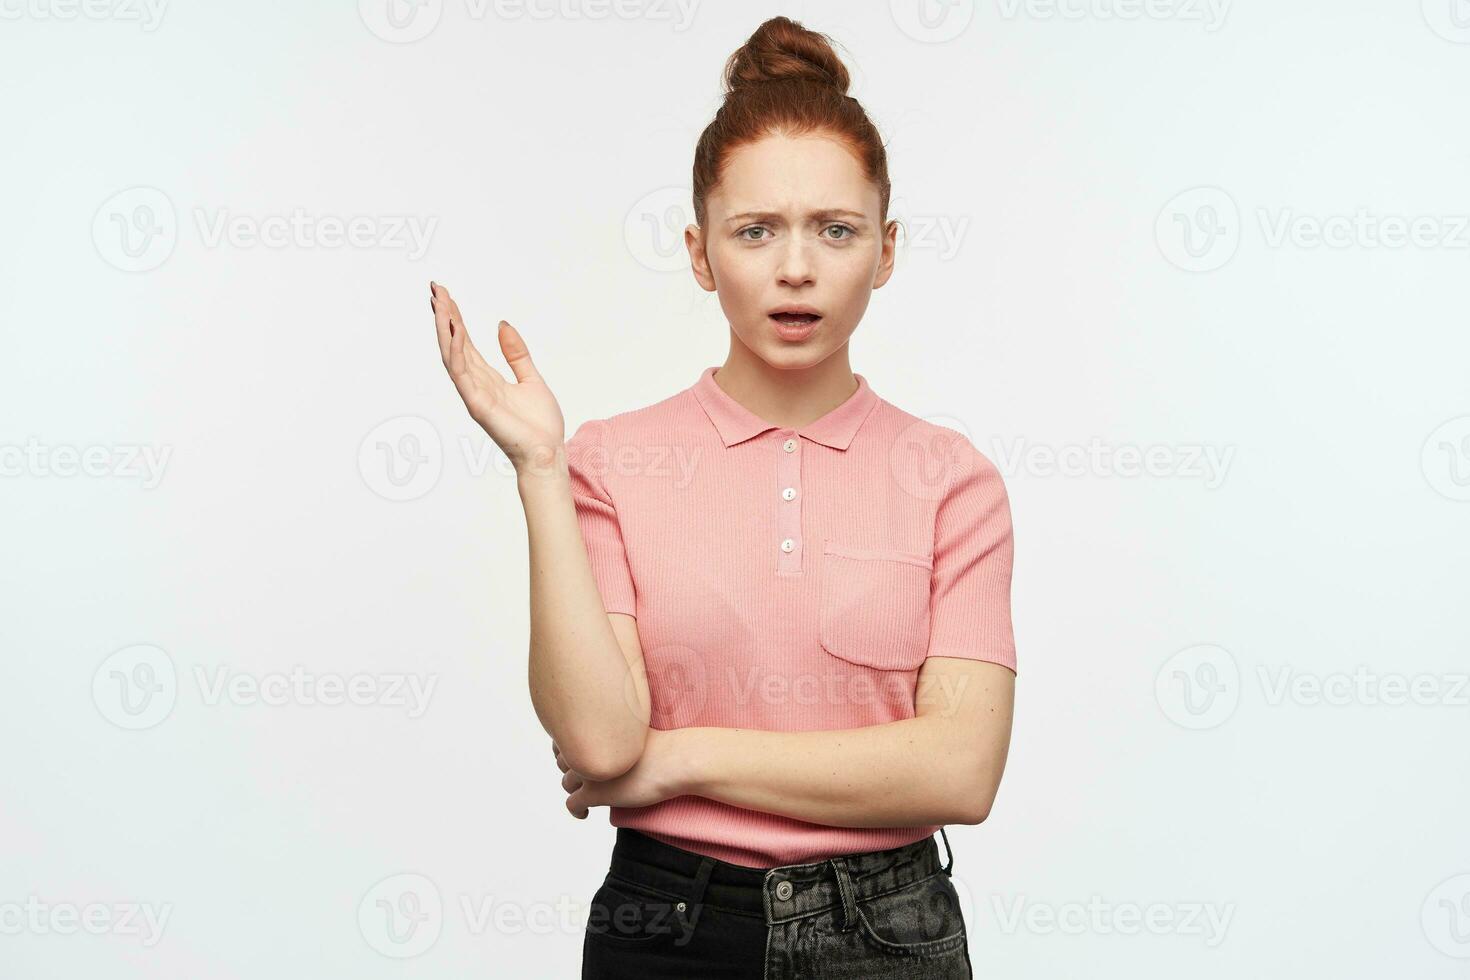 Unhappy lady, frowning woman with ginger hair bun. Wearing pink t-shirt and black jeans. Raise her hand in disagreement. Watching at the camera, isolated over white background. photo